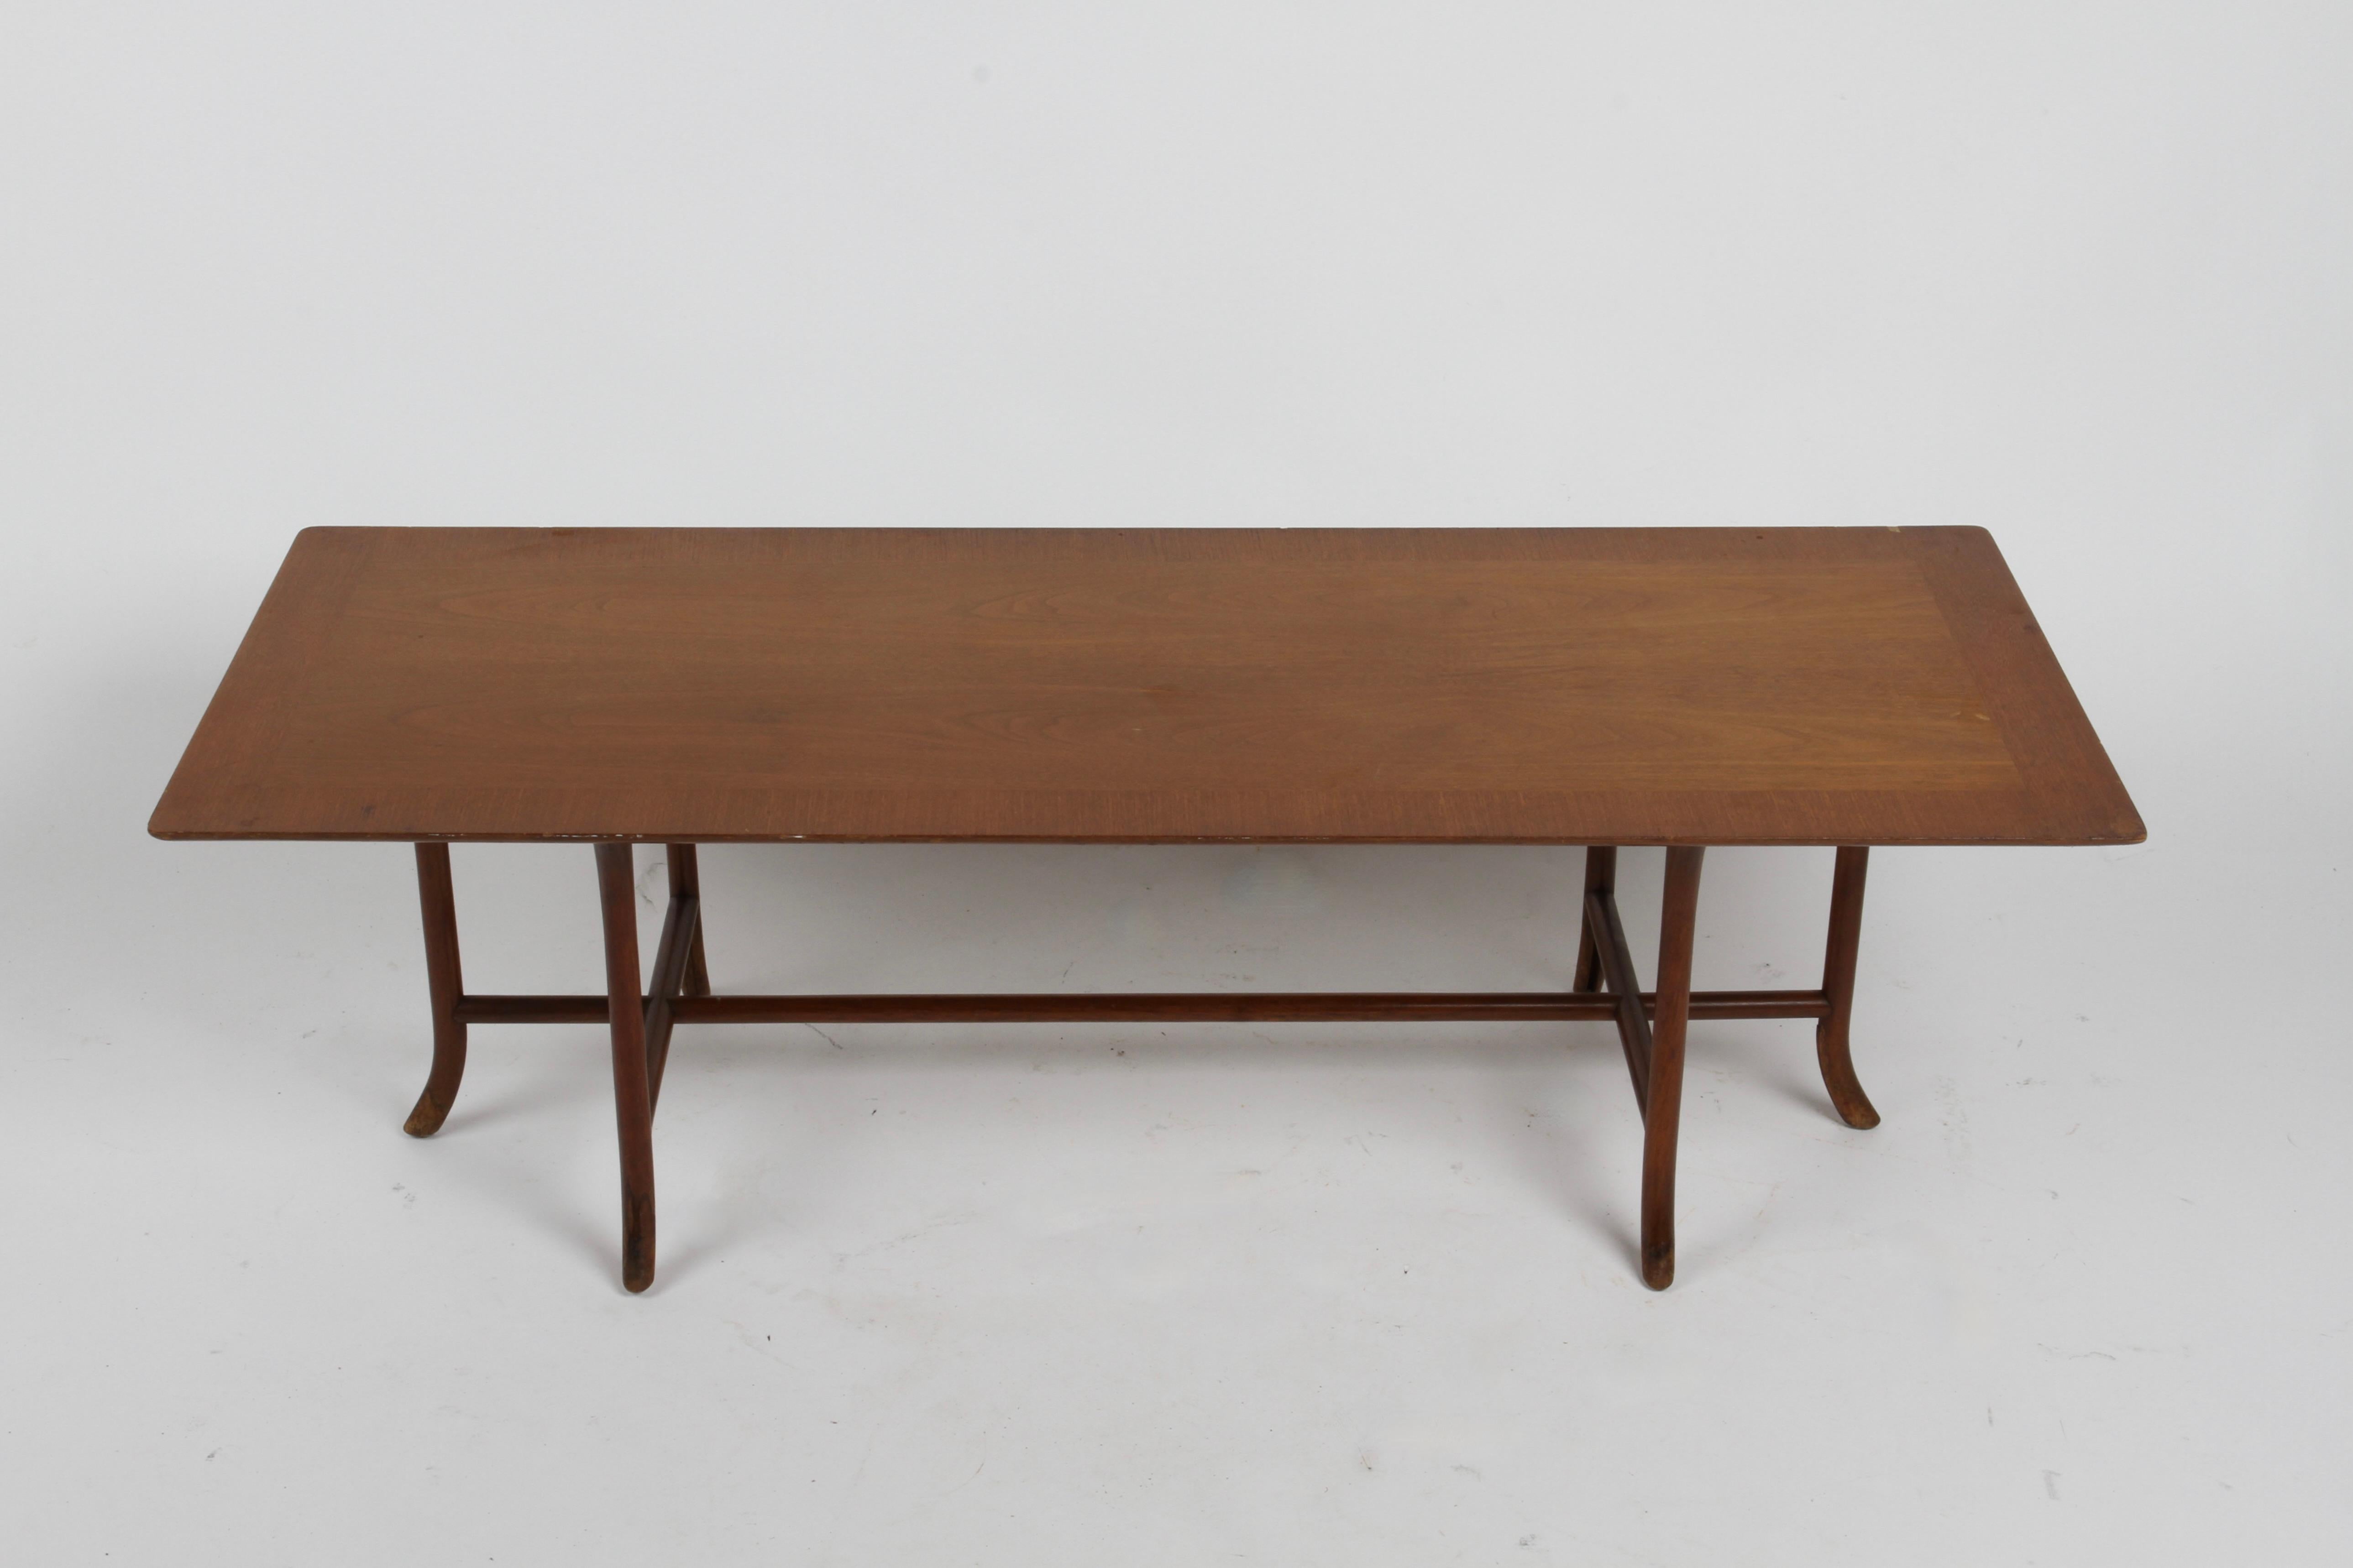 Elegant T.H.Gibbings-Gibbings for Widdicomb, this rarely seen walnut rectangular cross-trestle coffee table with sabre legs shown in original sherry finish. Walnut book matched veneer top with edge banding, on classic Gibbings sabre legs. Shown in